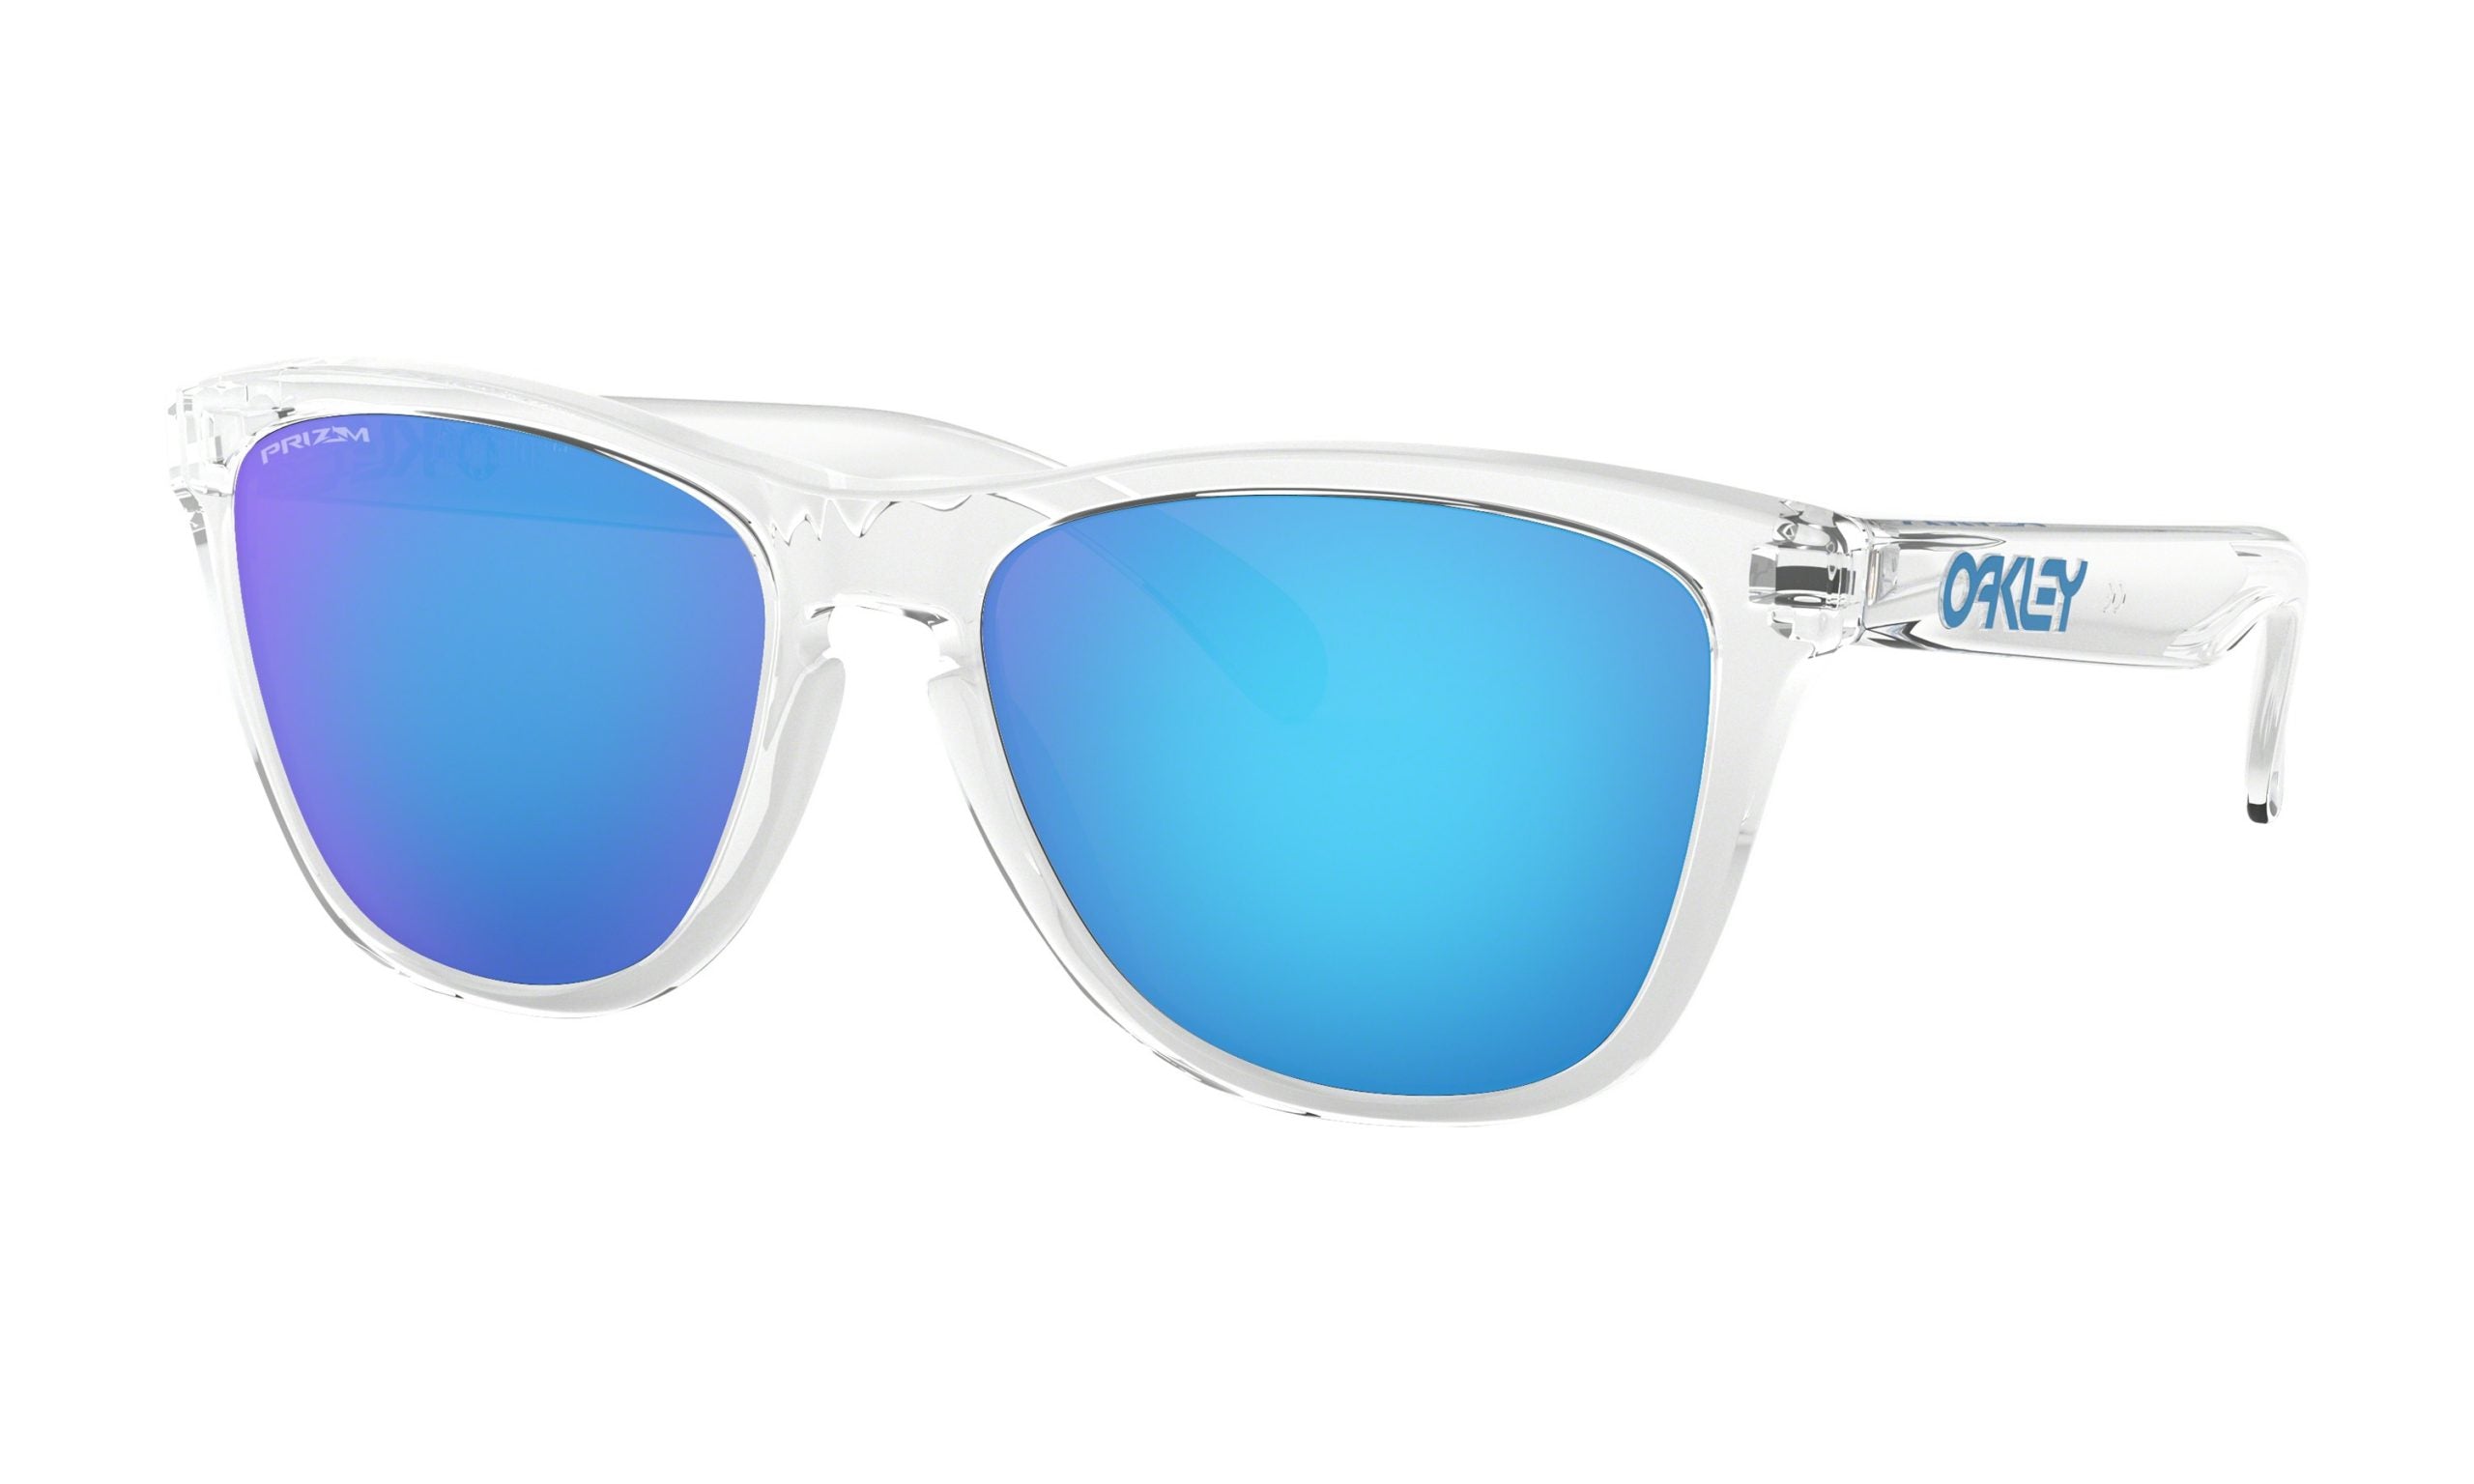 OAKLEY Frogskins Sunglasses - Crystal Clear - Prizm Sapphire Lens